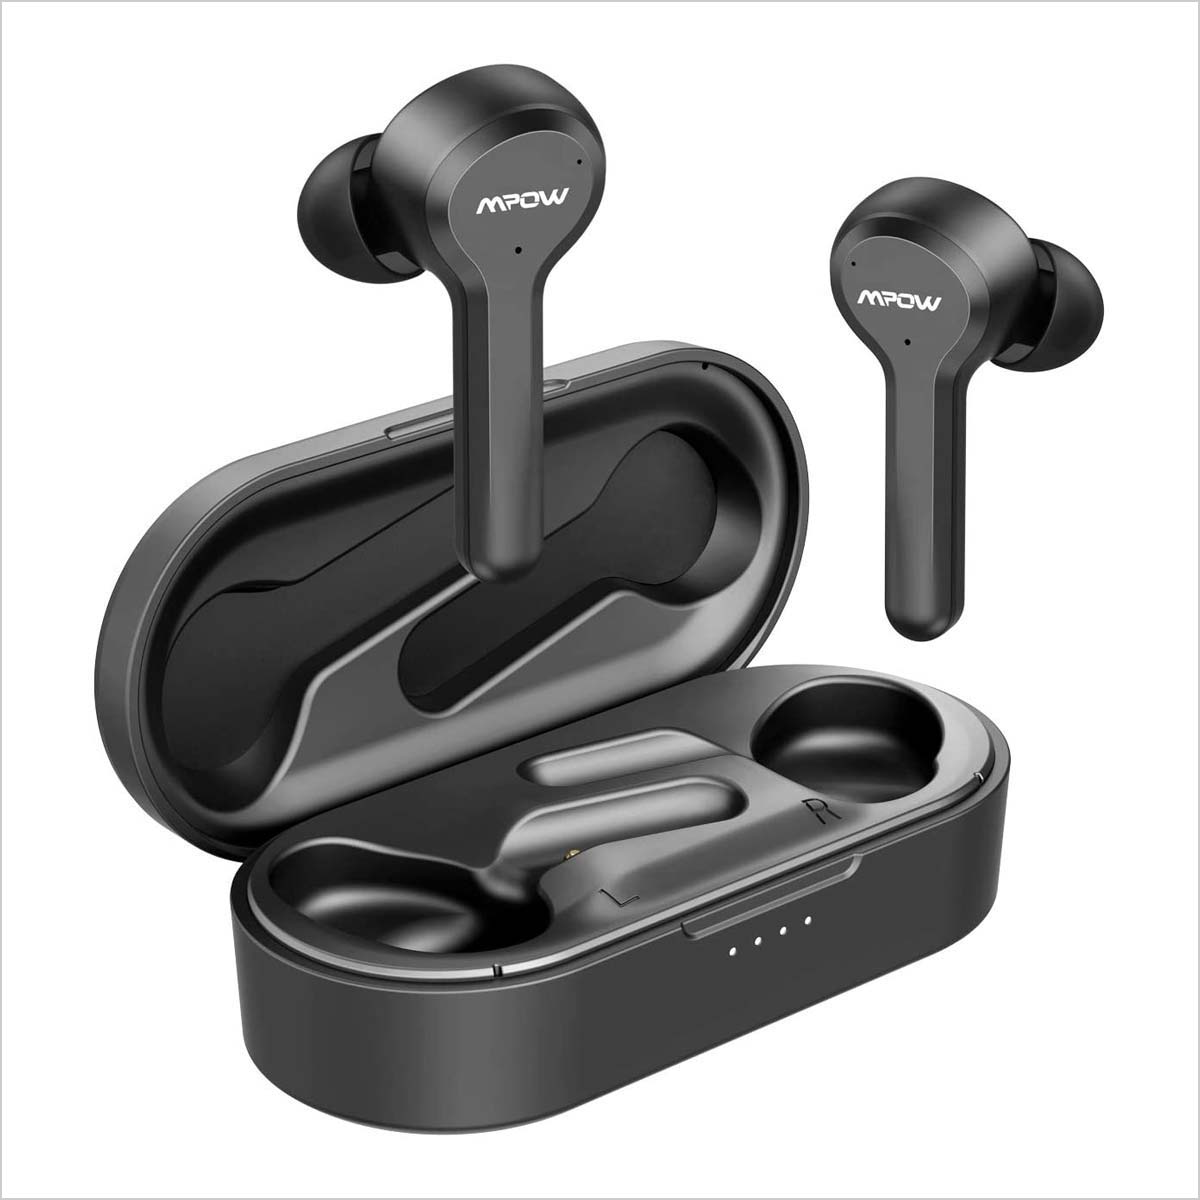 Top-rated noise-canceling earbuds for travelers review - Review Blogspot